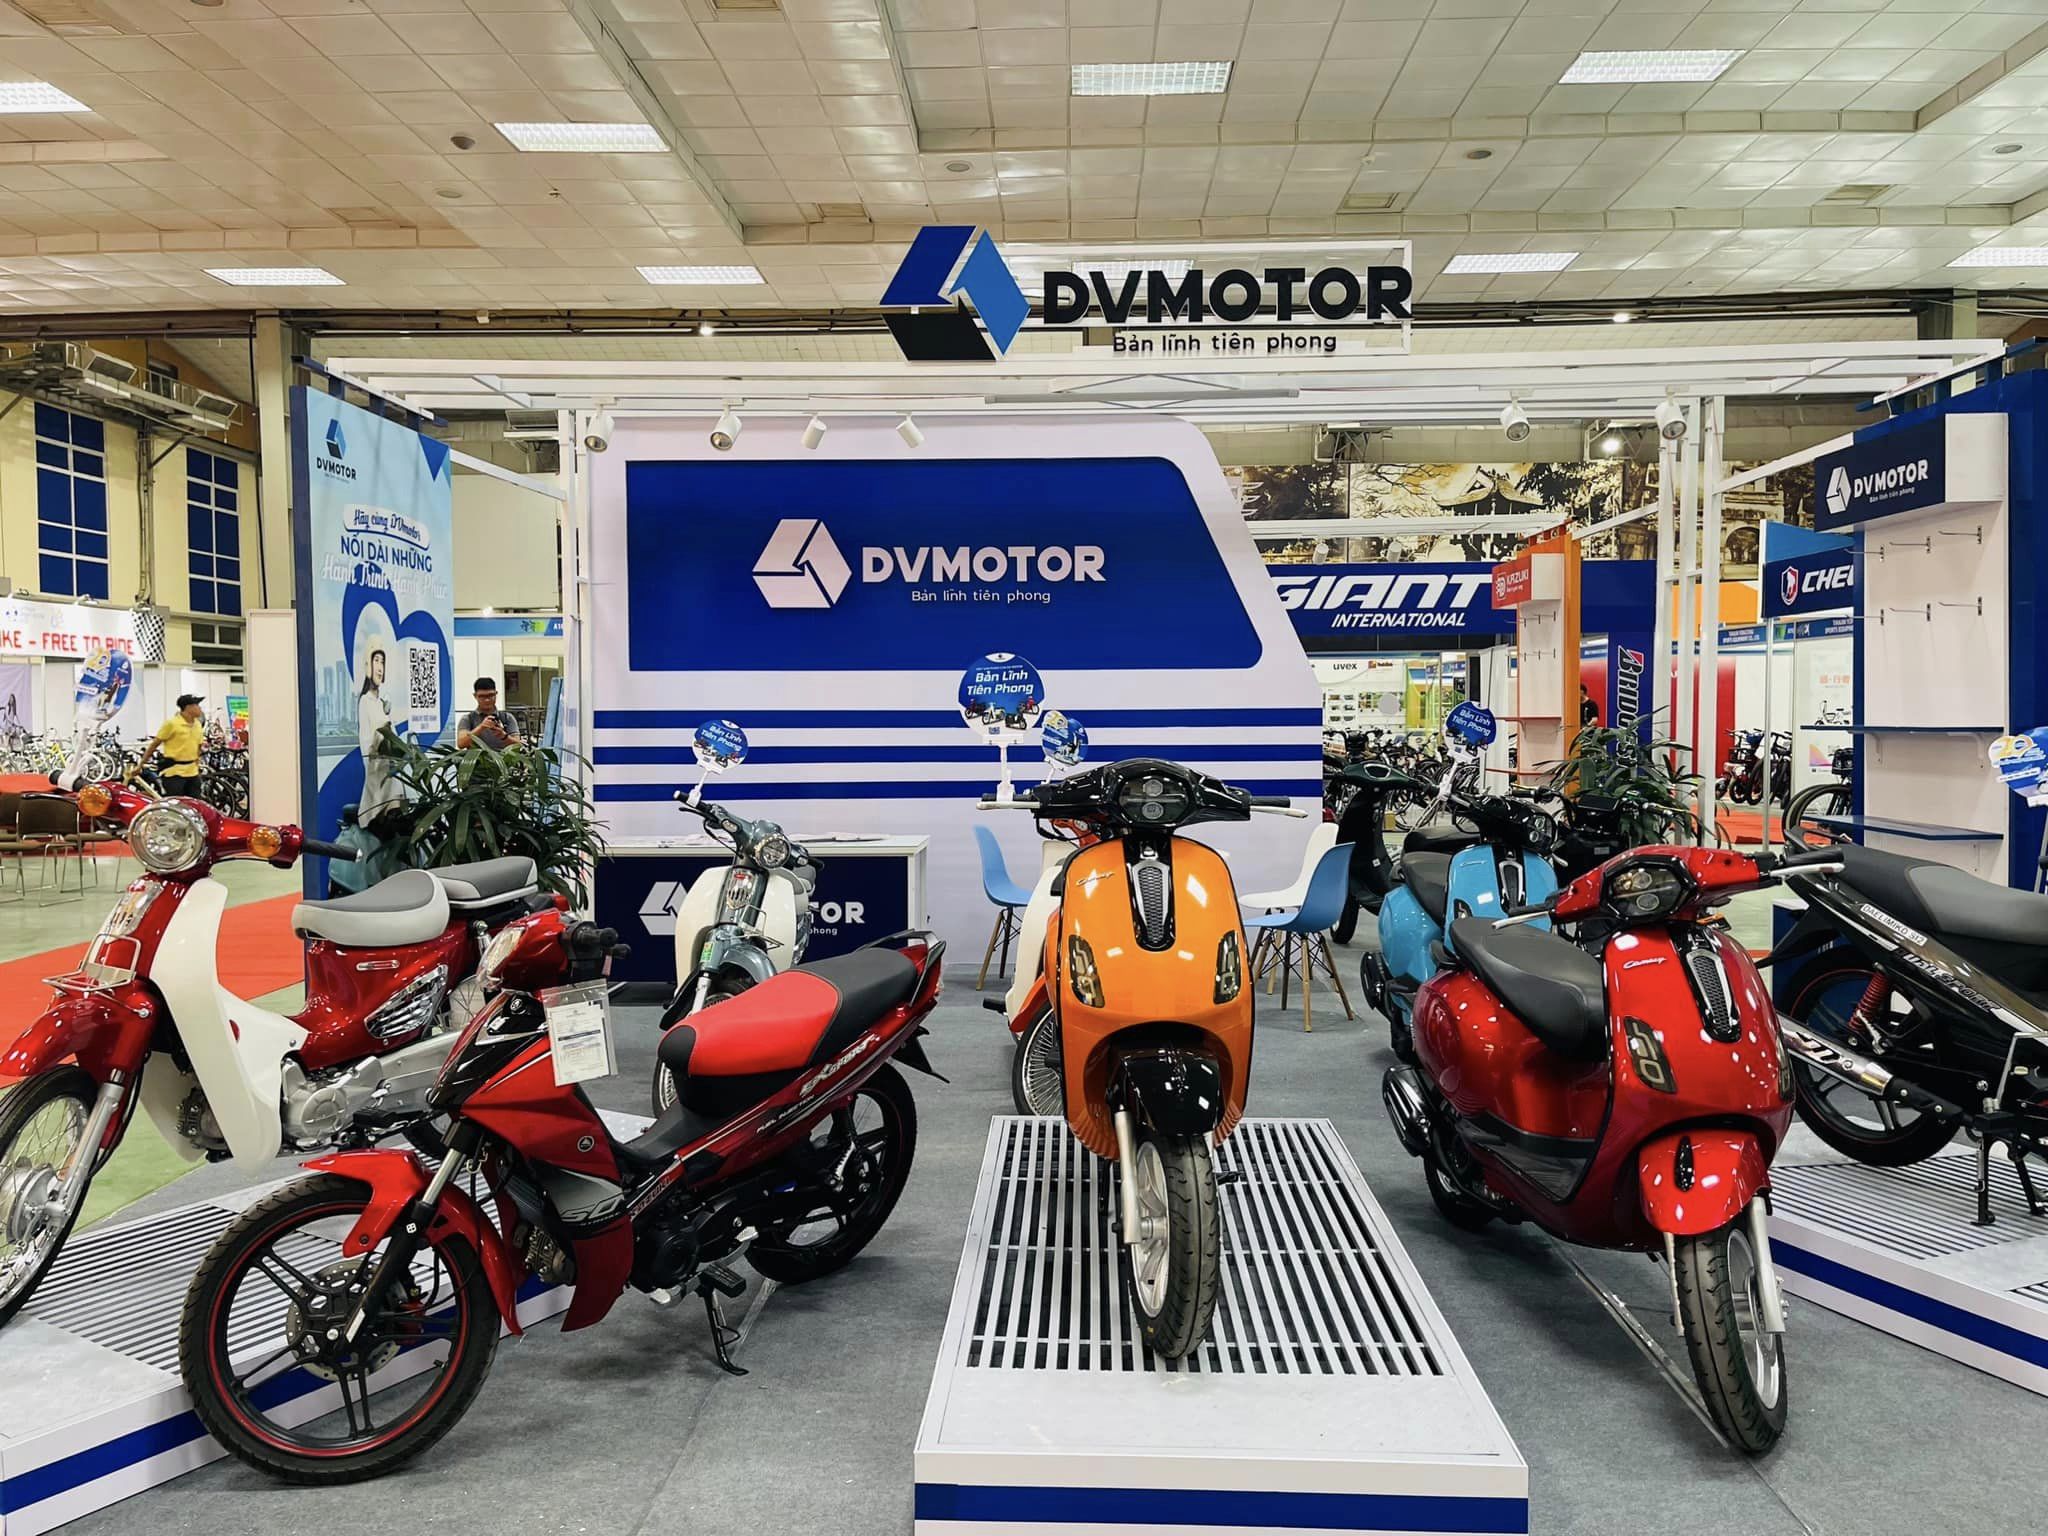 Prominent Exhibited Products at Vietnam Cycle Expo